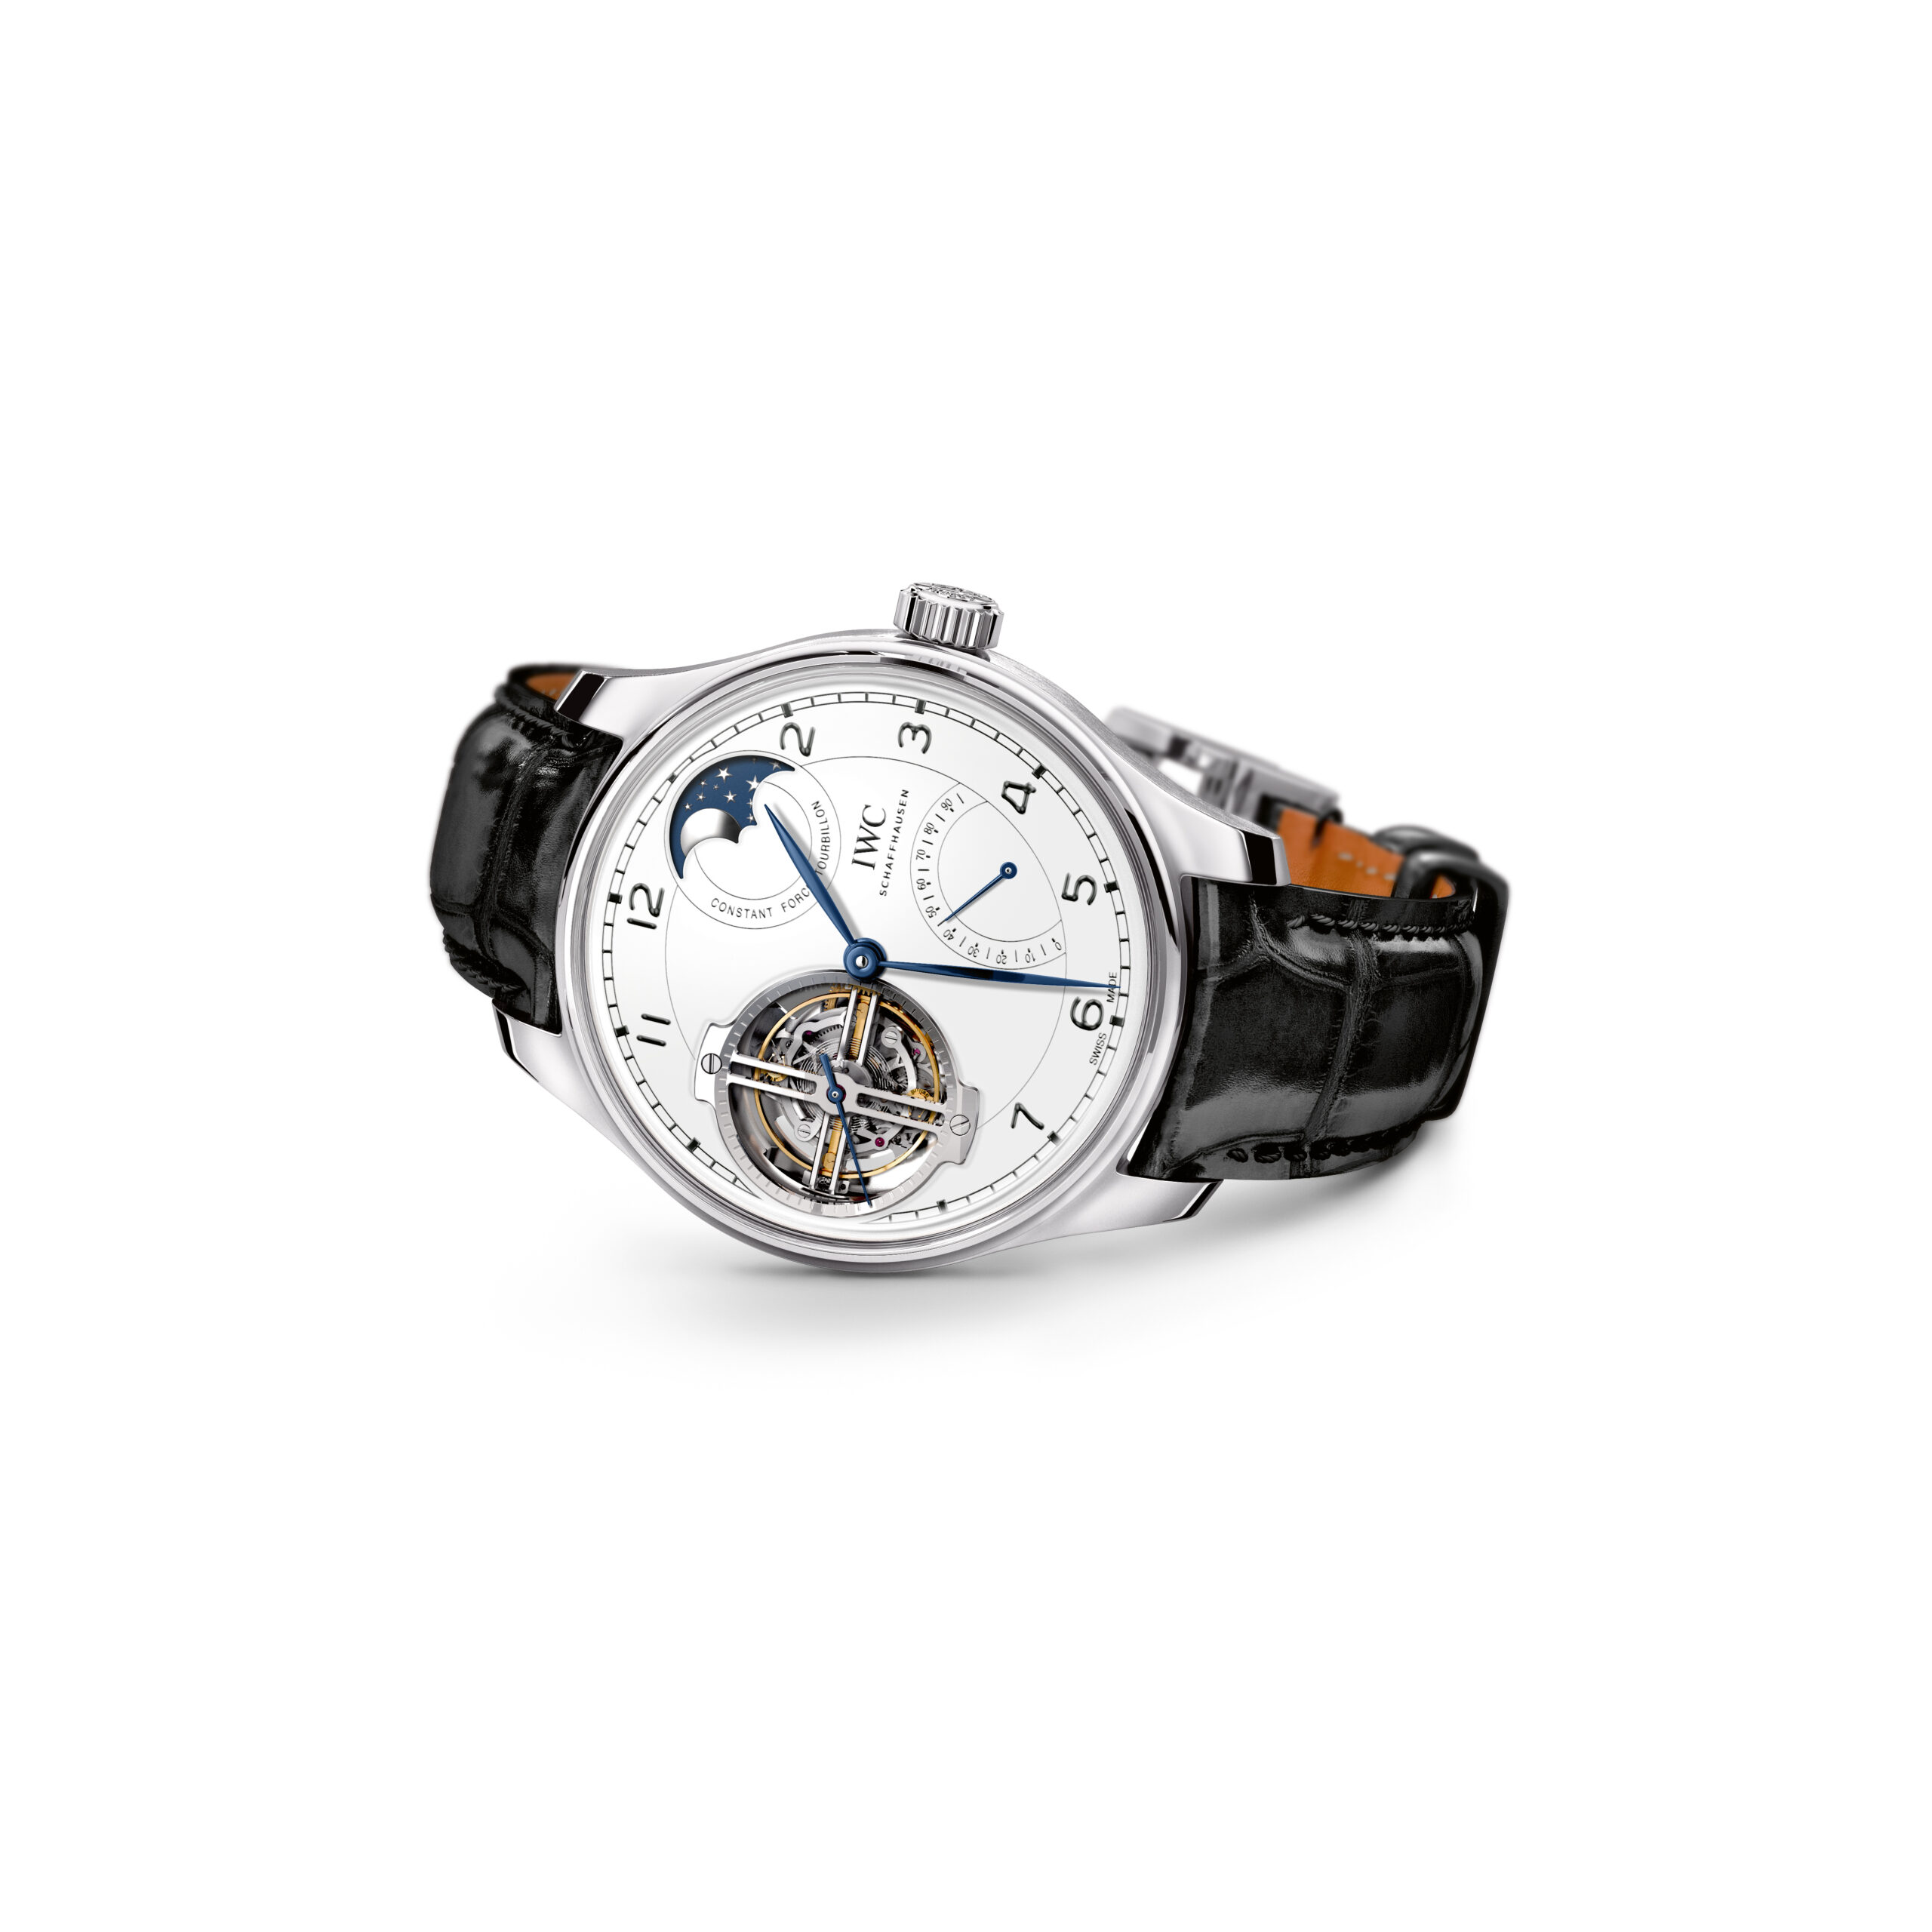 IWC Portugieser Constant-Force Tourbillon Edition “150 Years” (Ref. 5902)